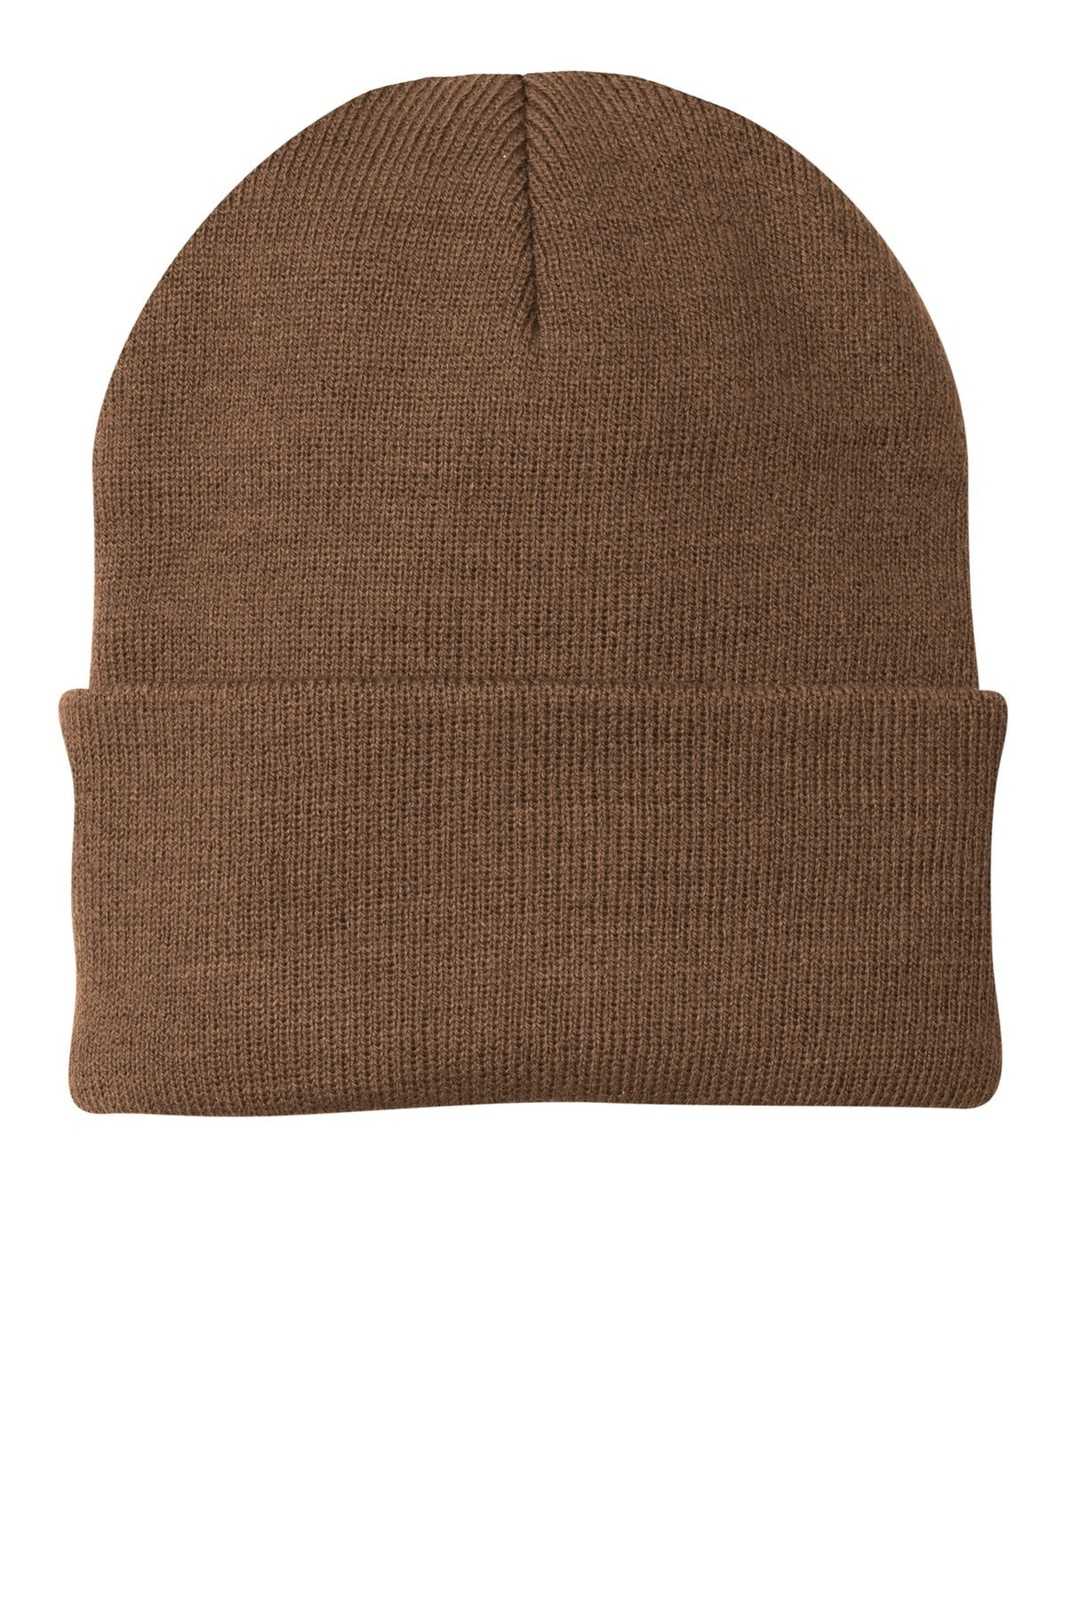 Port & Company CP90 Knit Cap with Cuff - Brown - HIT a Double - 1